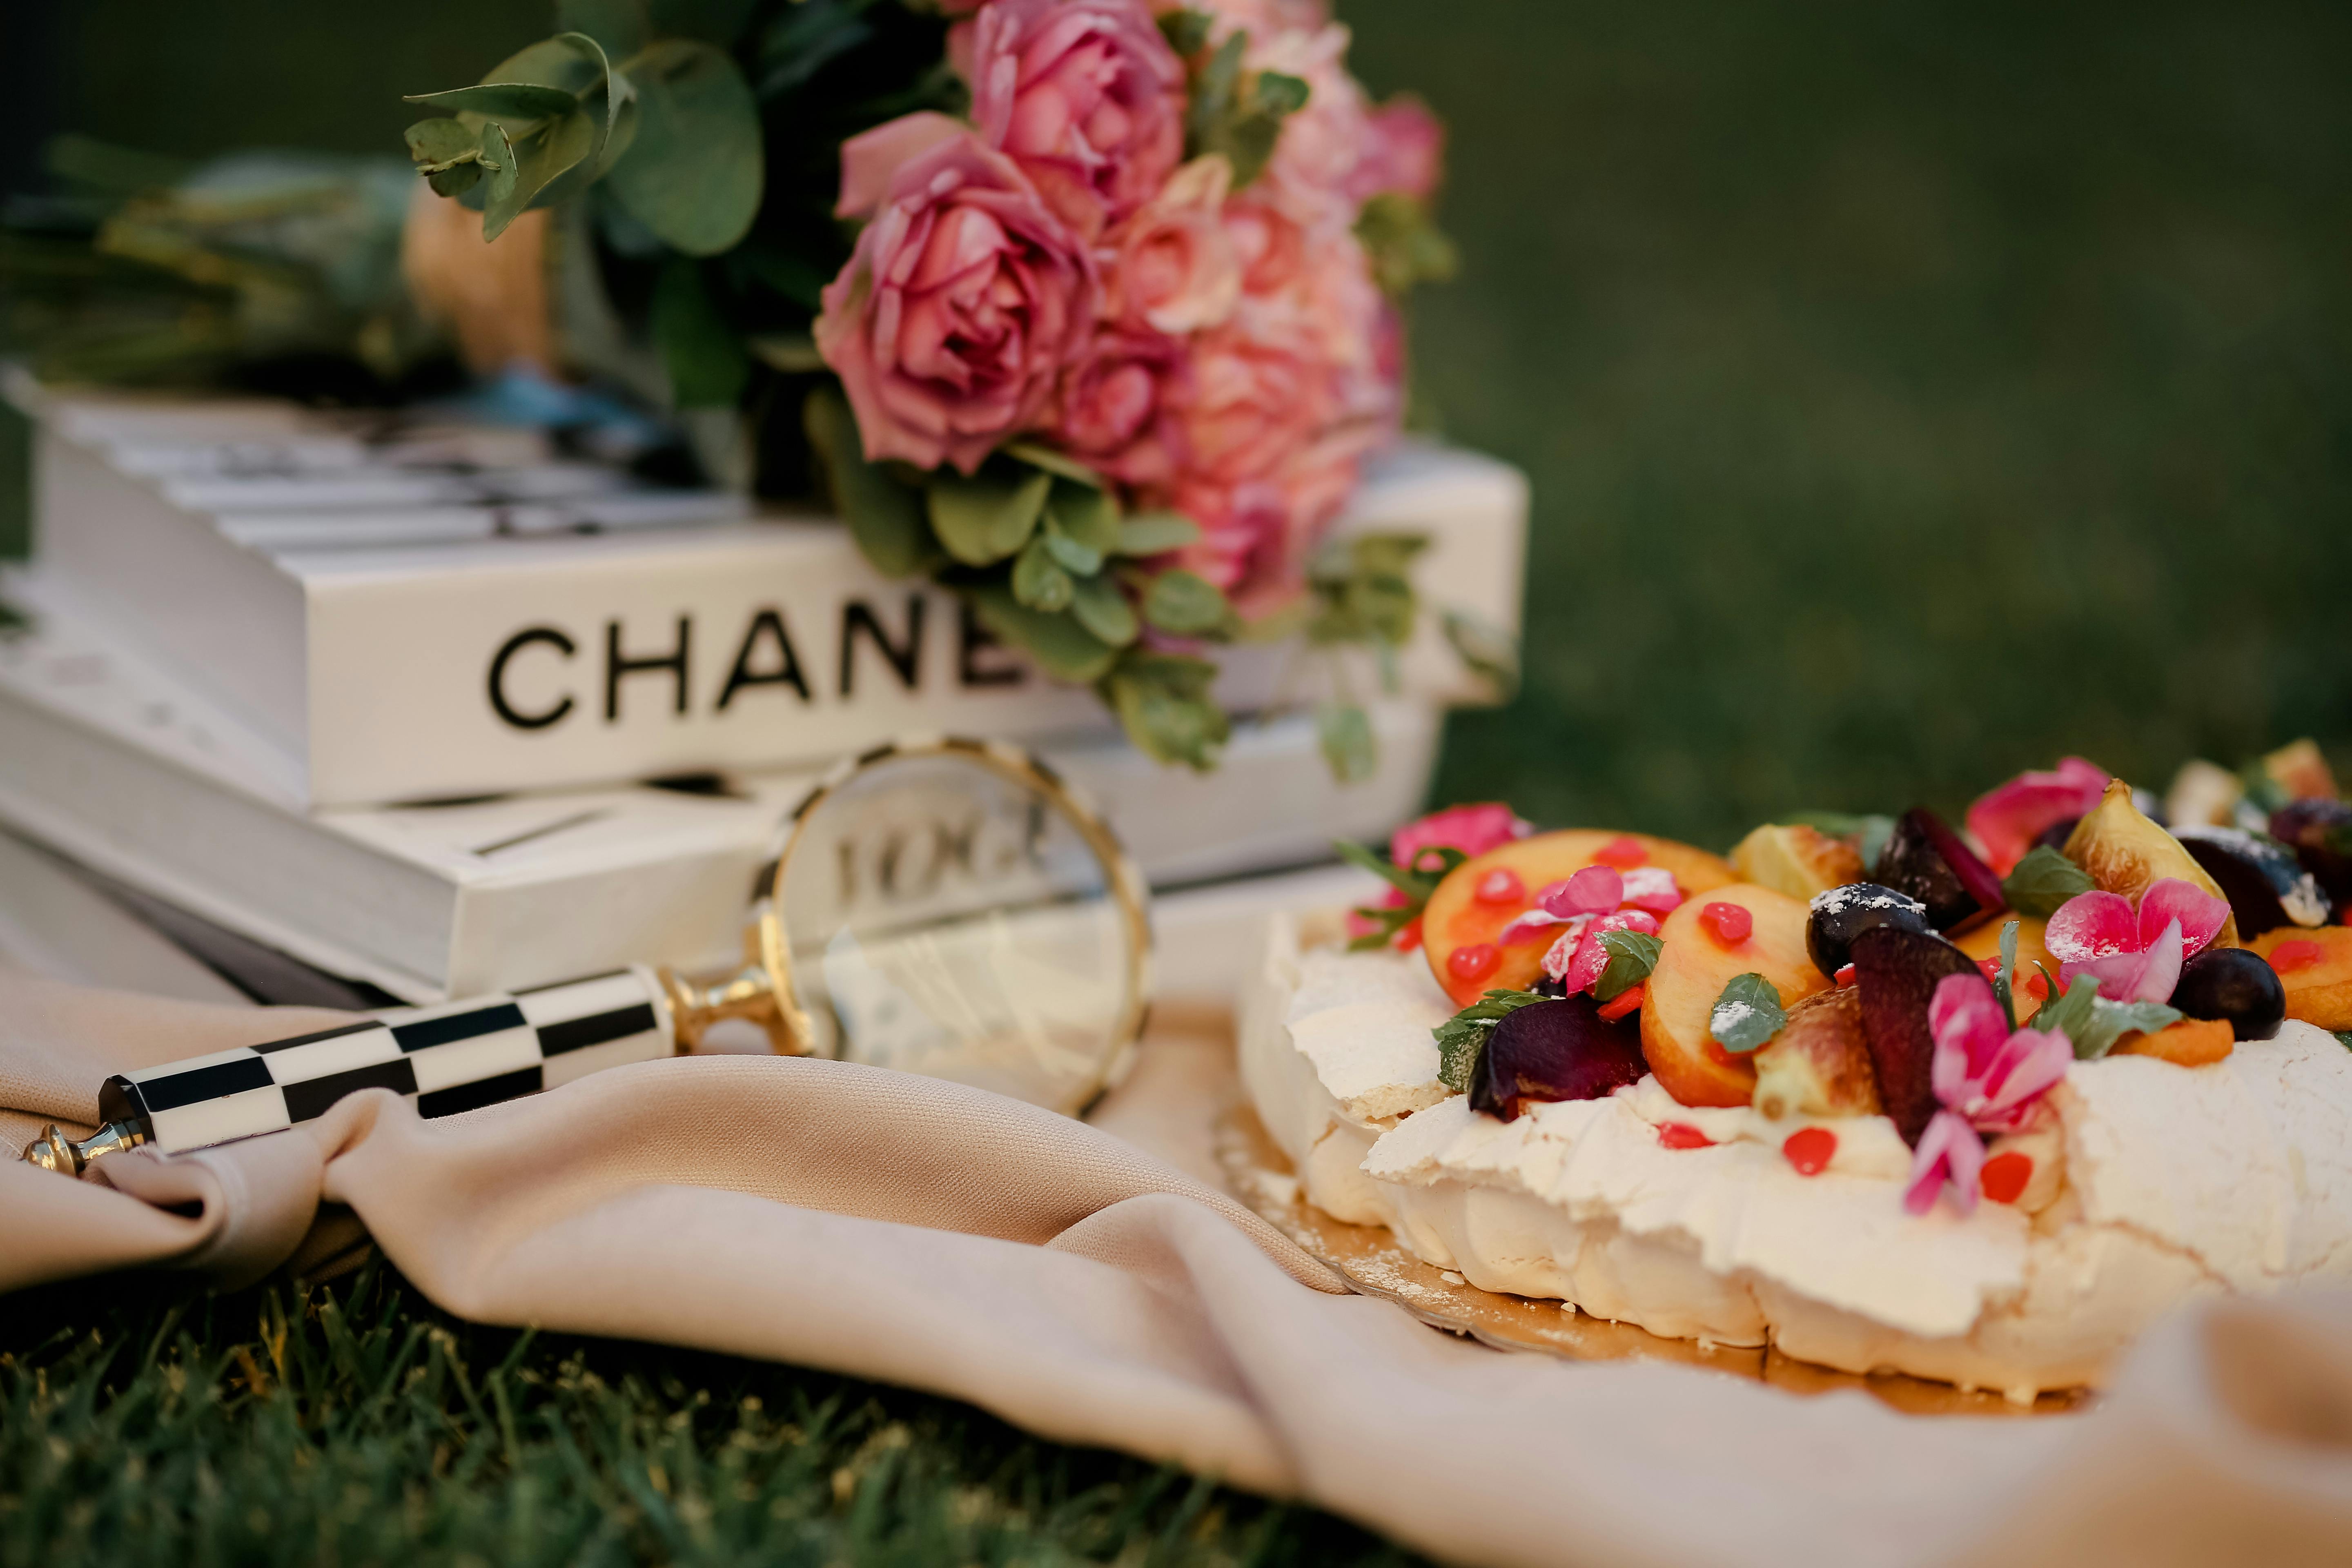 A Luxury Chanel Bag · Free Stock Photo